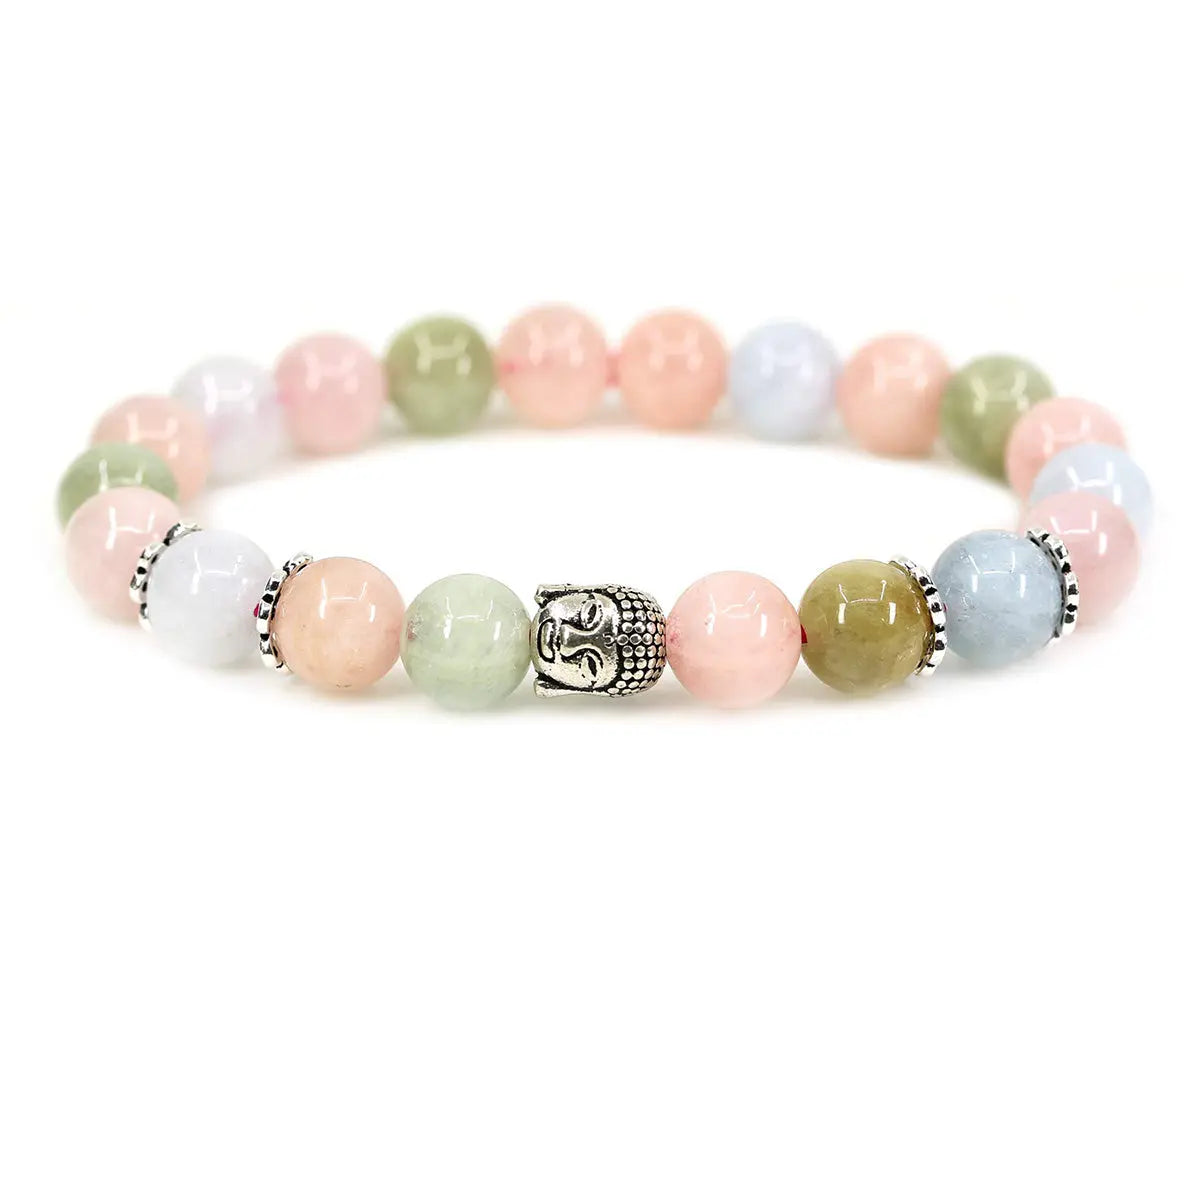 Feng Shui Buddha Crystal Bracelet - 16 Different Crystals Healing Crystal Home